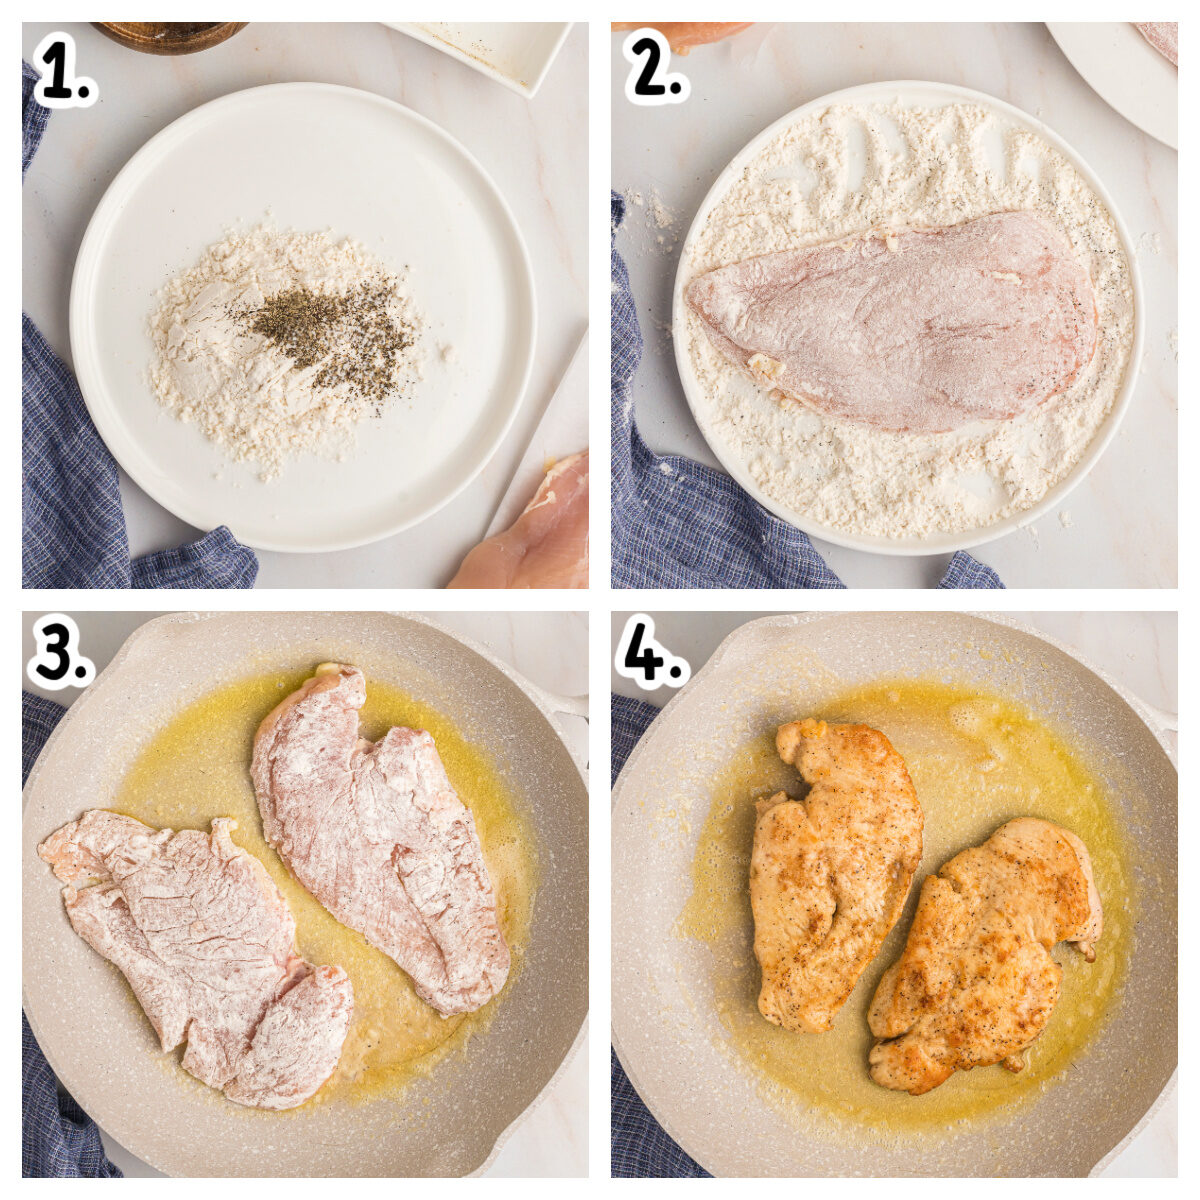 How to coat chicken in flour and brown it in skillet.